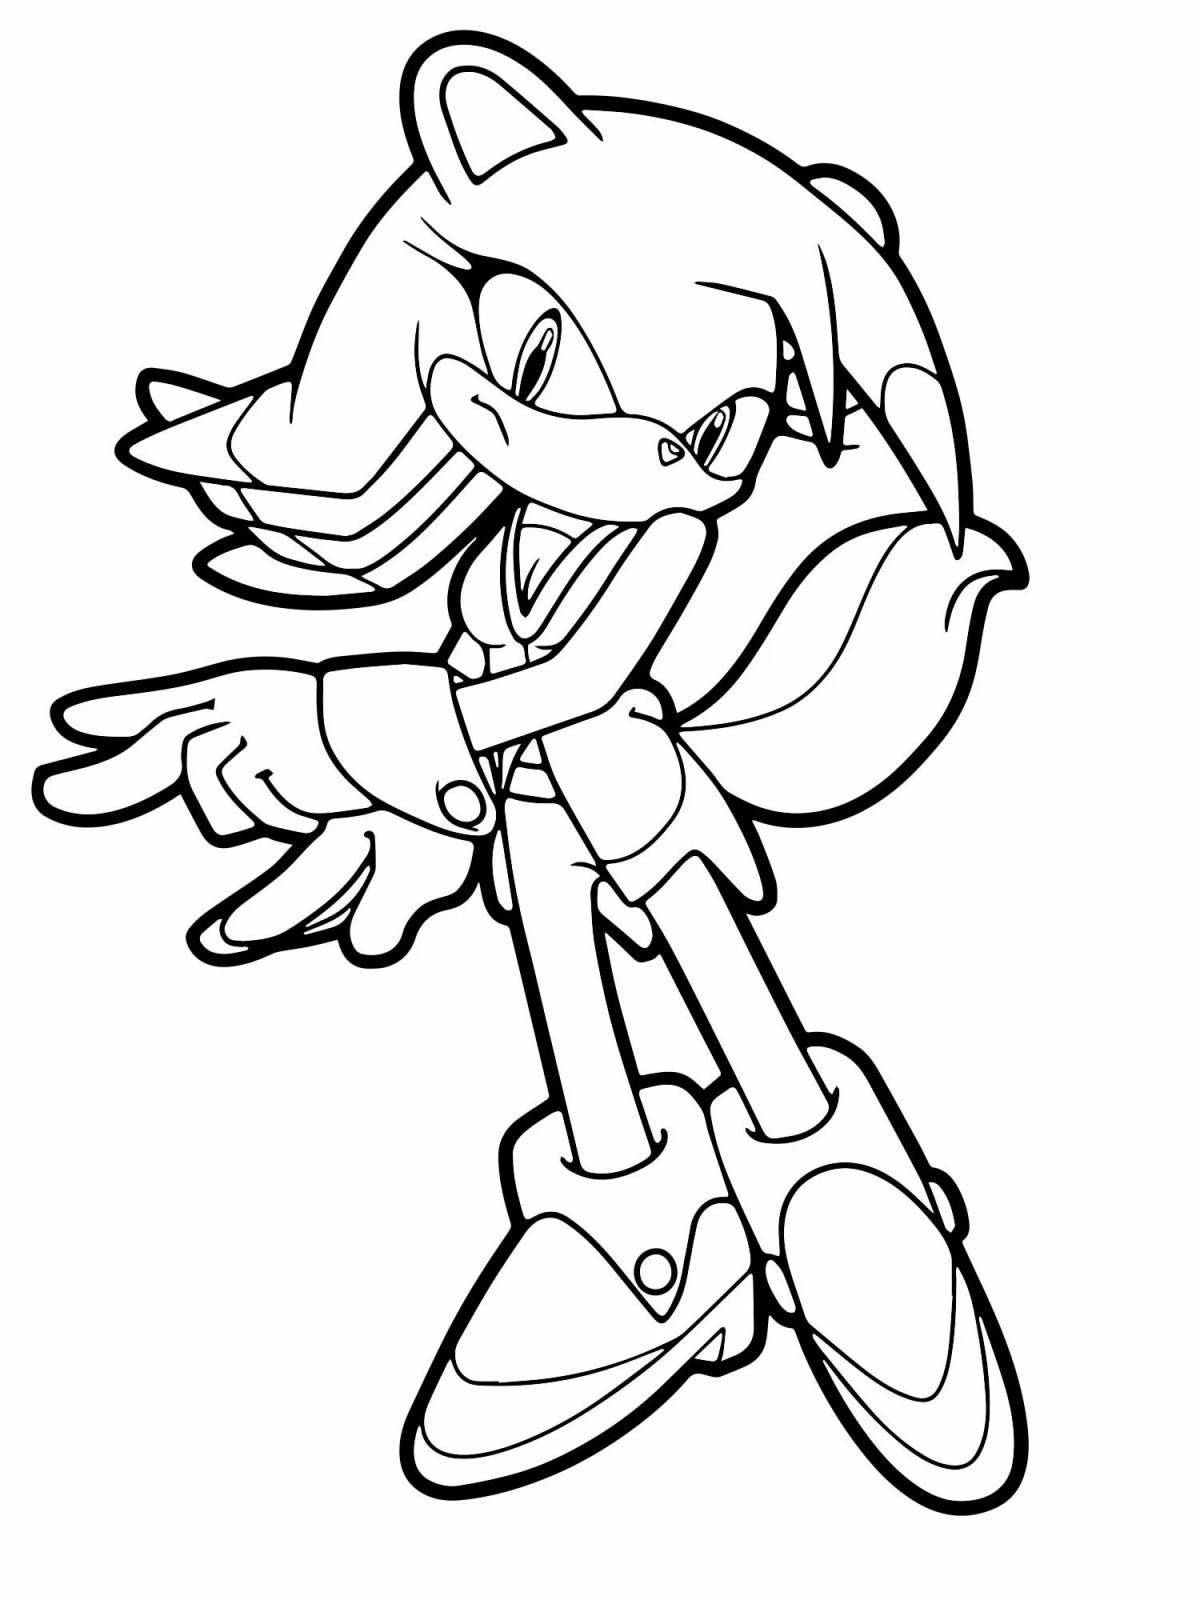 Glitter blue sonic coloring page